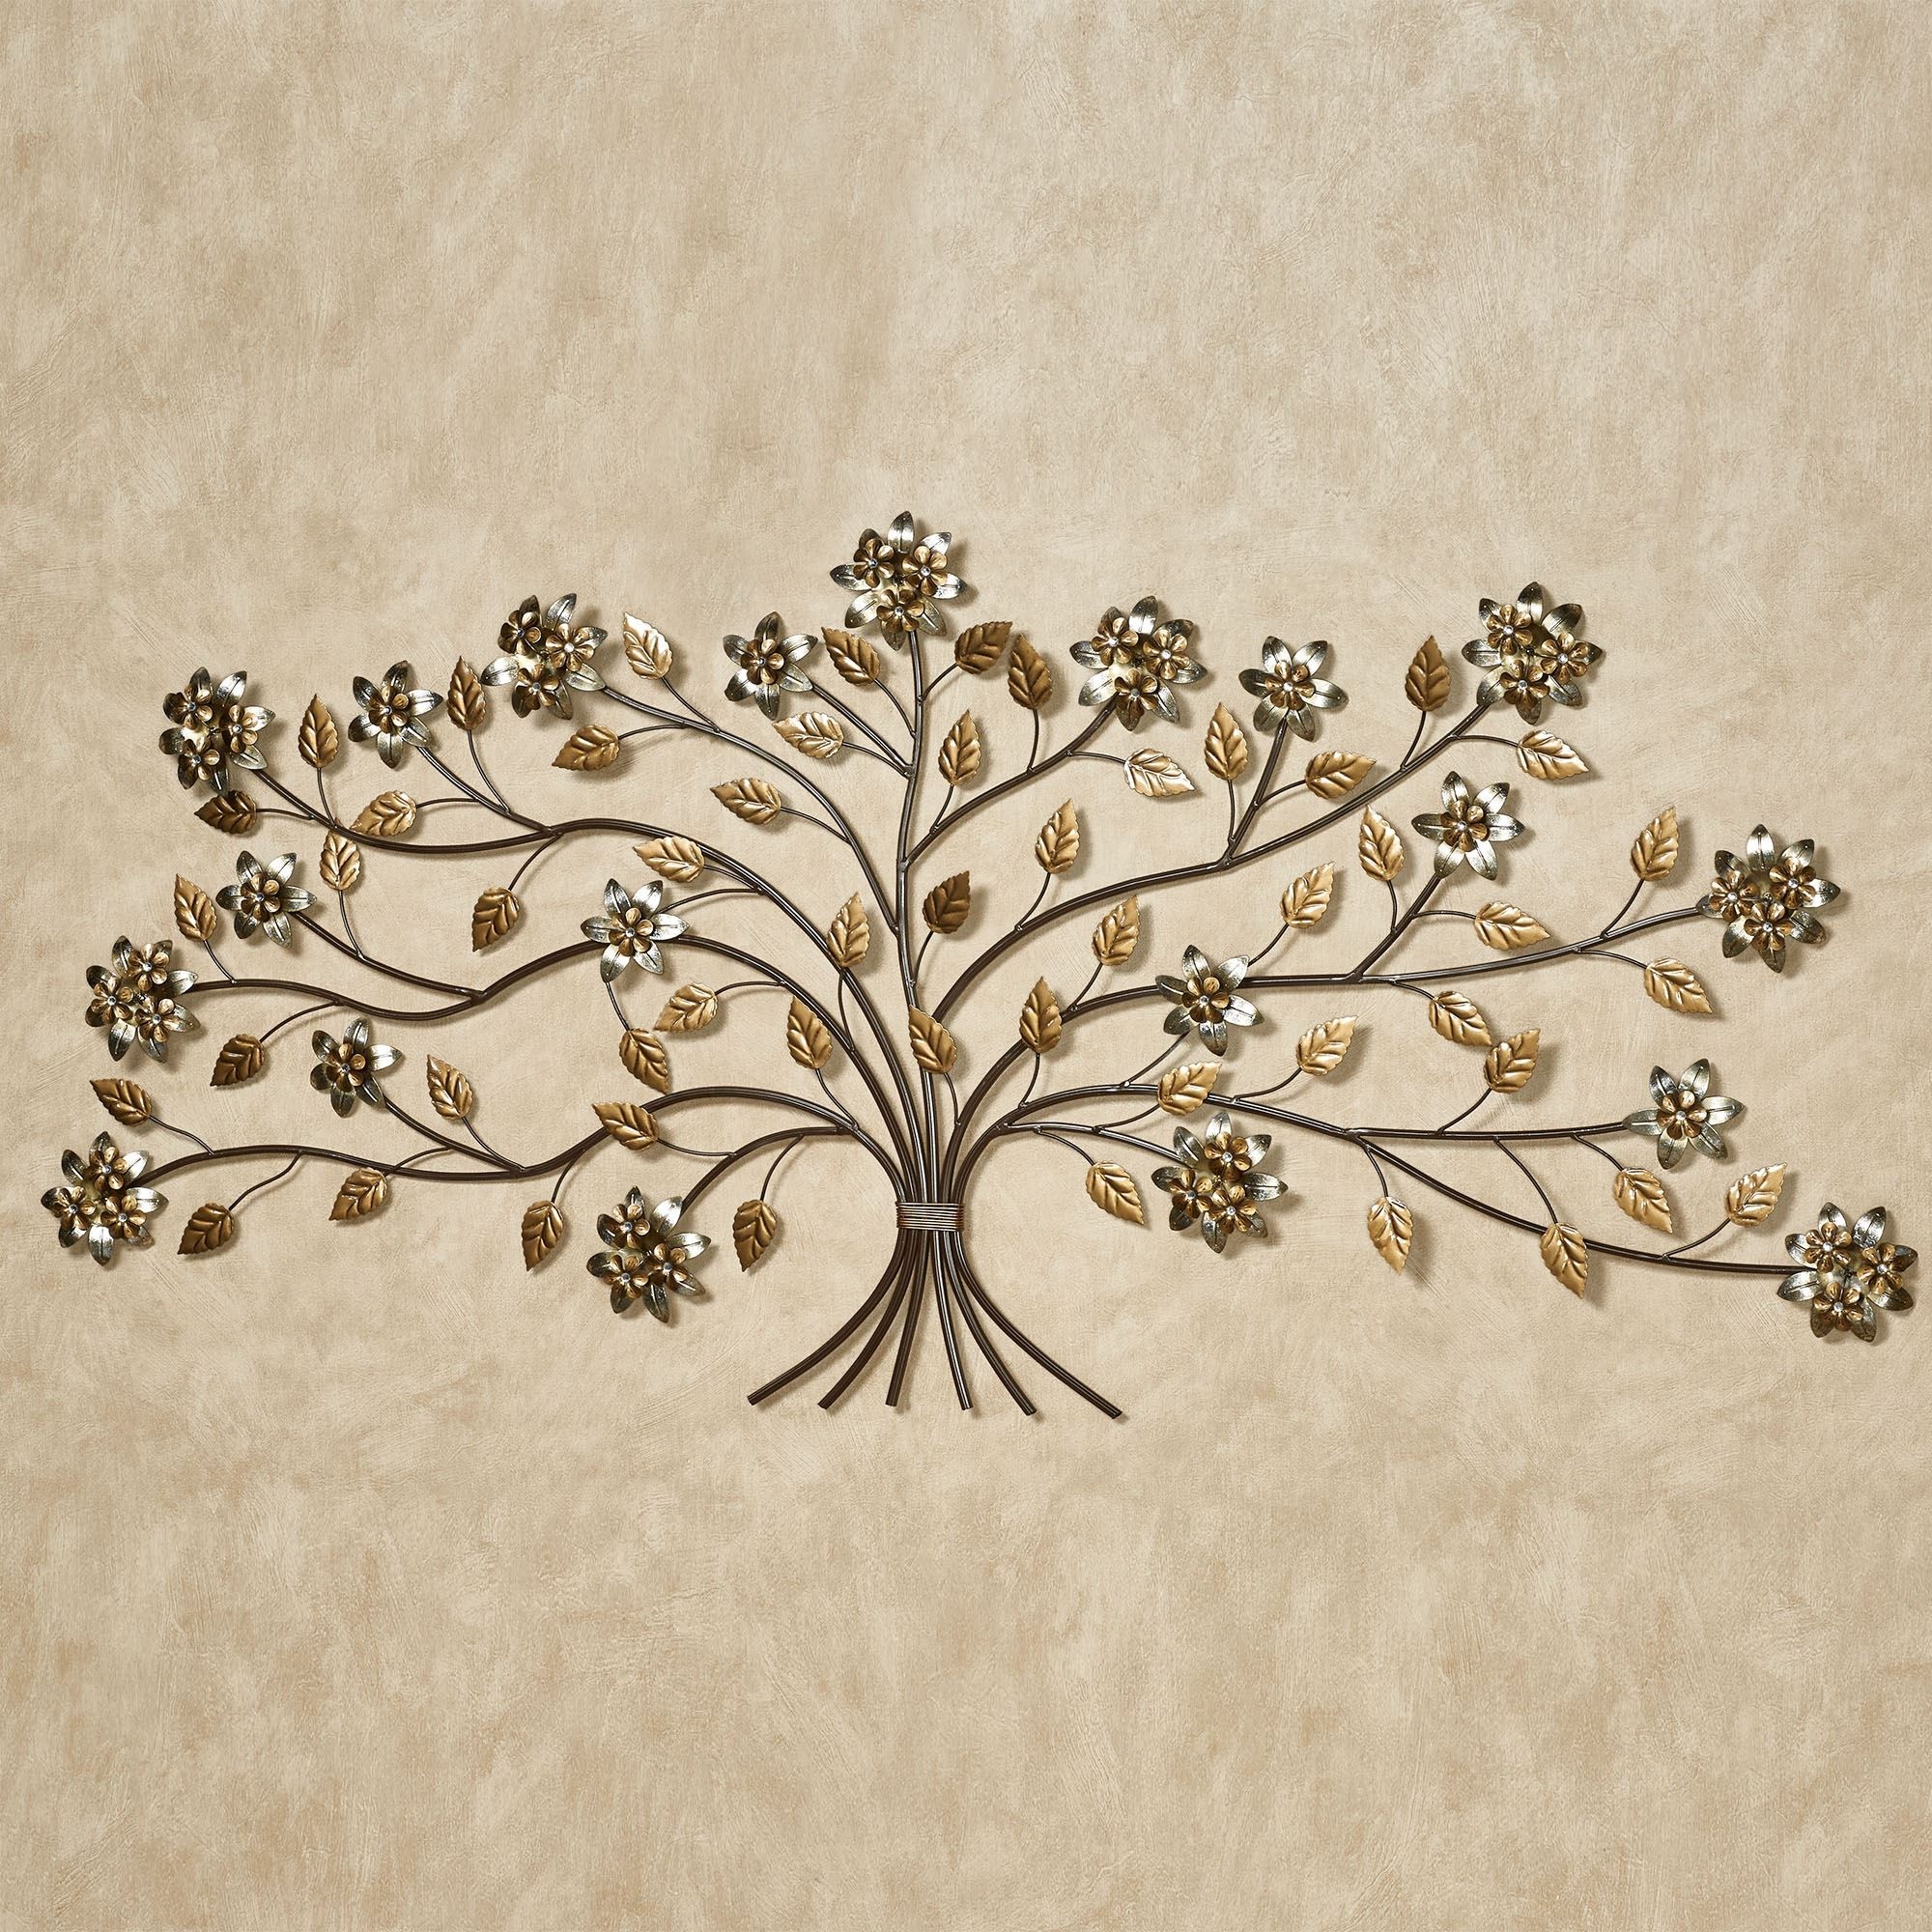 Bellissa floral branch metal wall art 59 inches wide